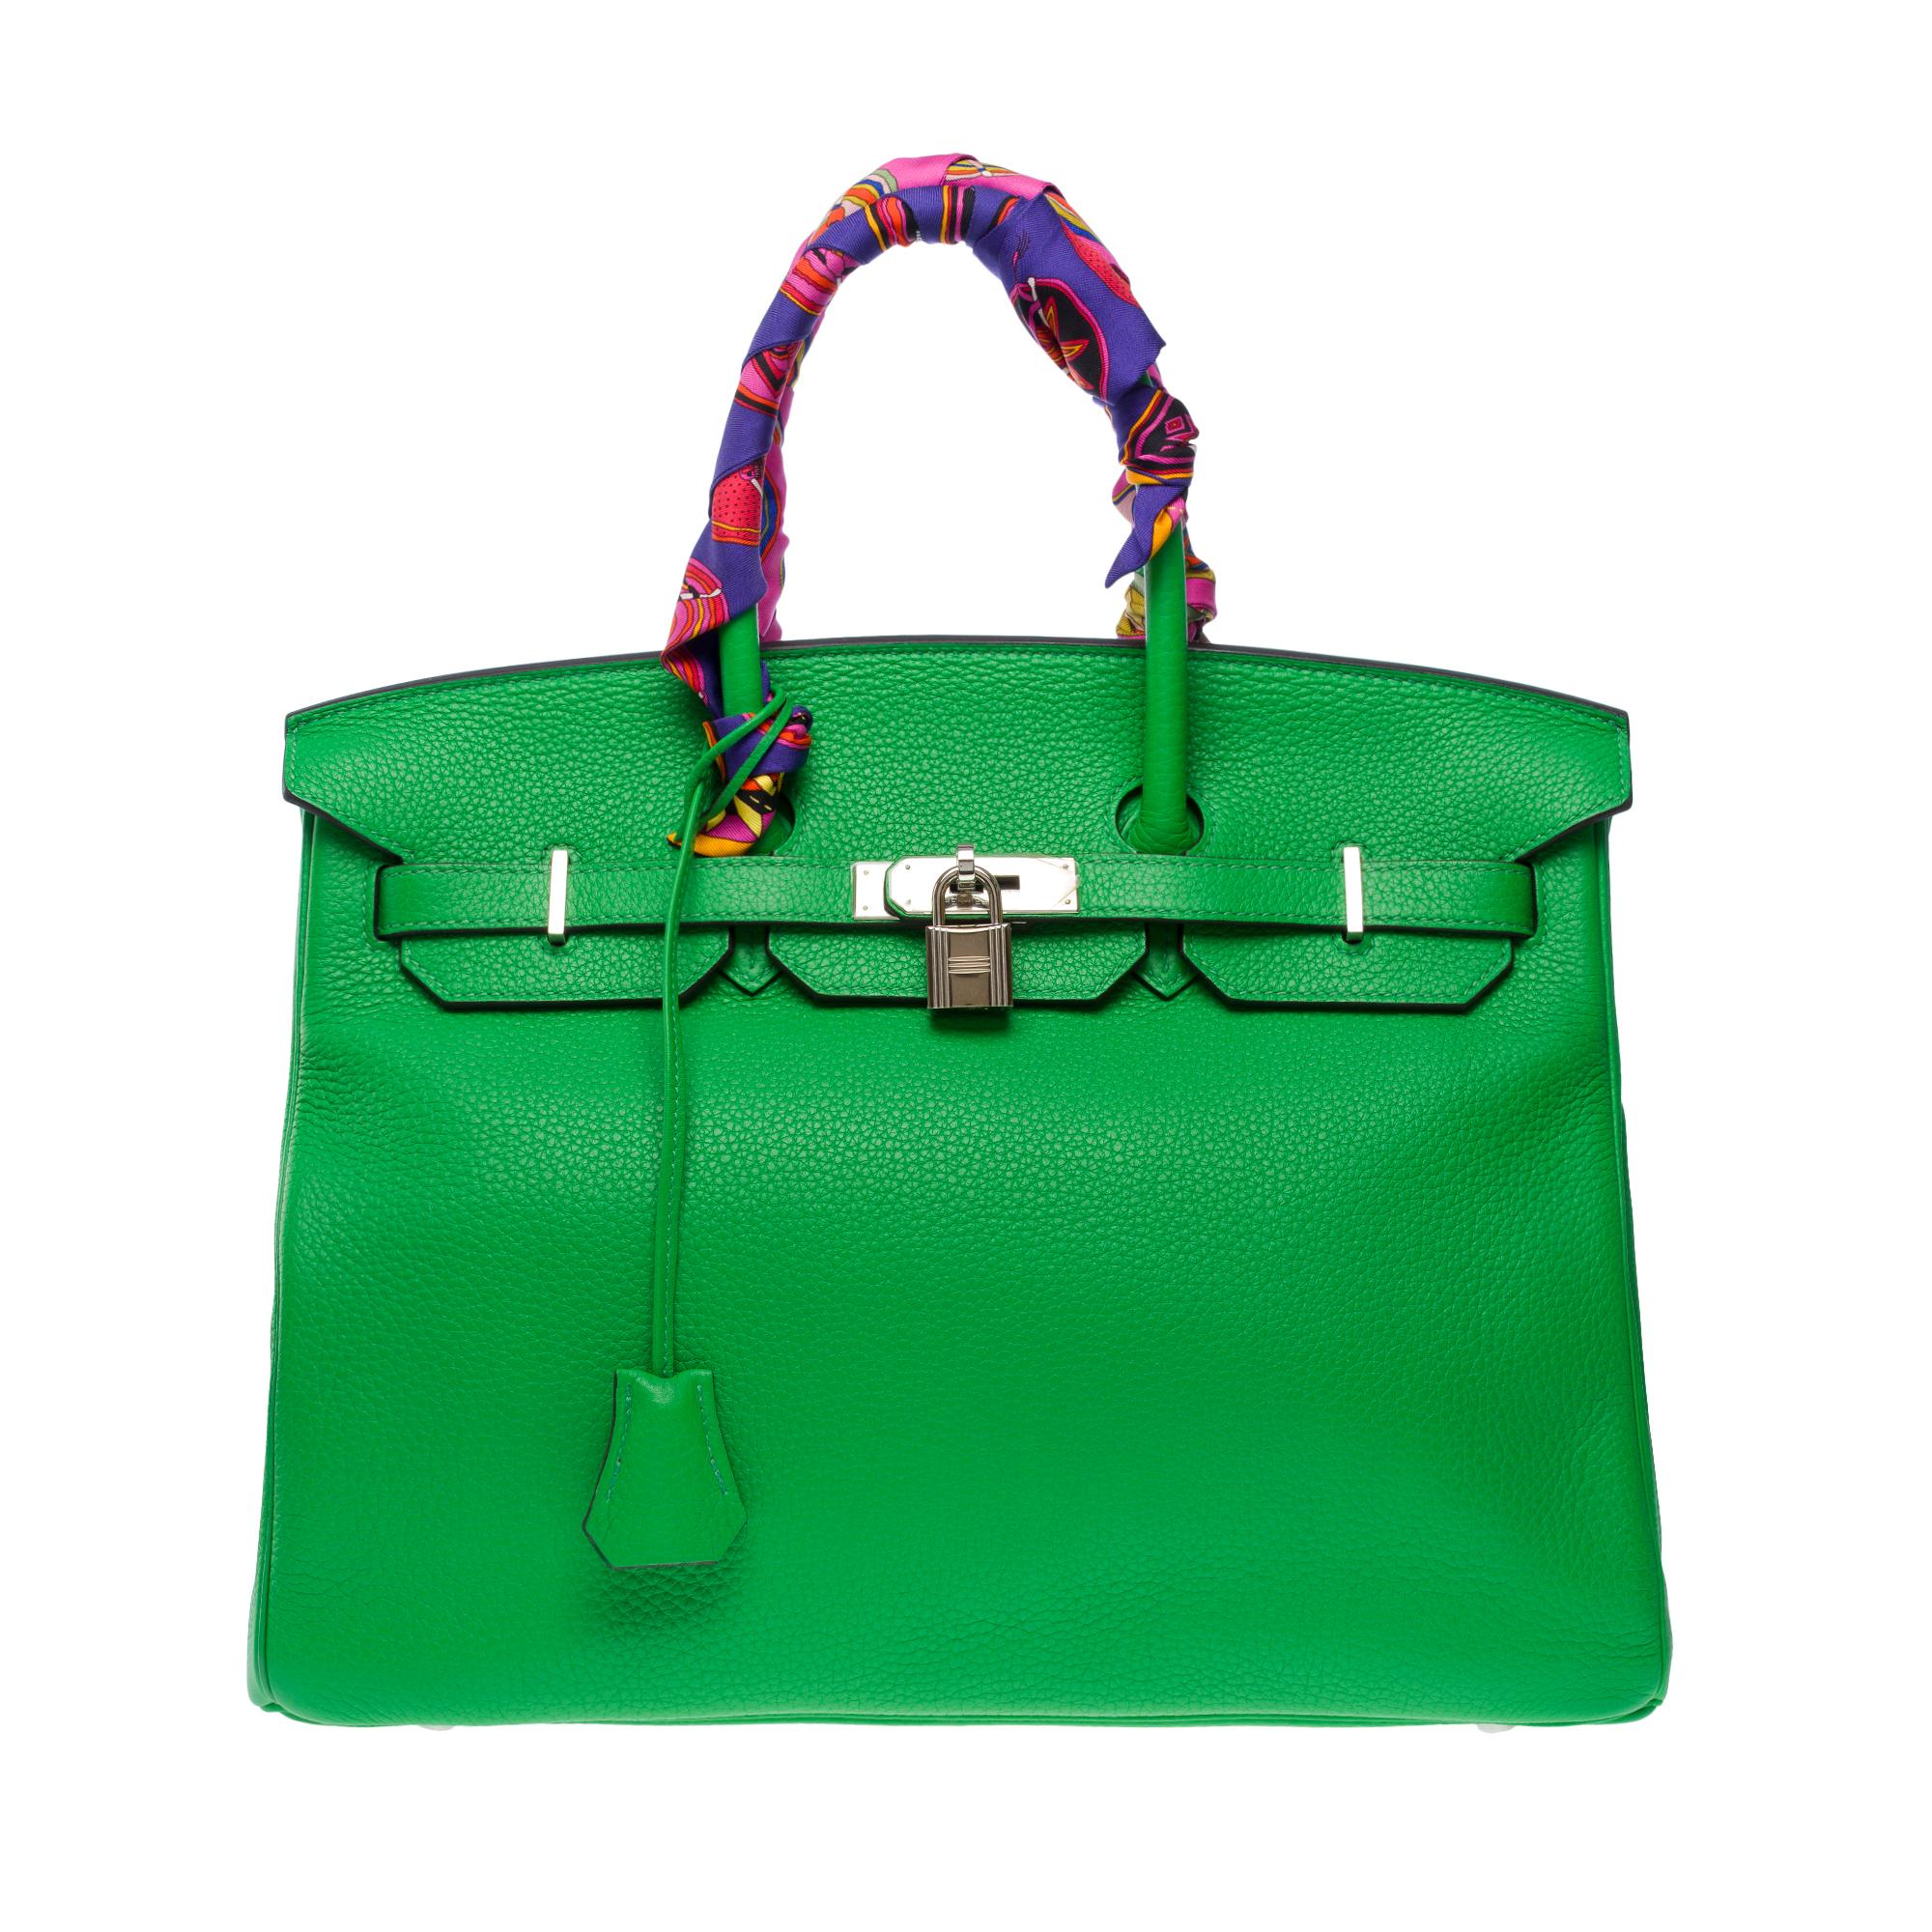 Fantastic and very Sought-after Hermes Birkin 35 handbag in Green Bamboo Togo leather handbag, palladium silver metal hardware, double green leather handle allowing a hand carry

Flap closure
Lining in green leather, one zip pocket, one patch